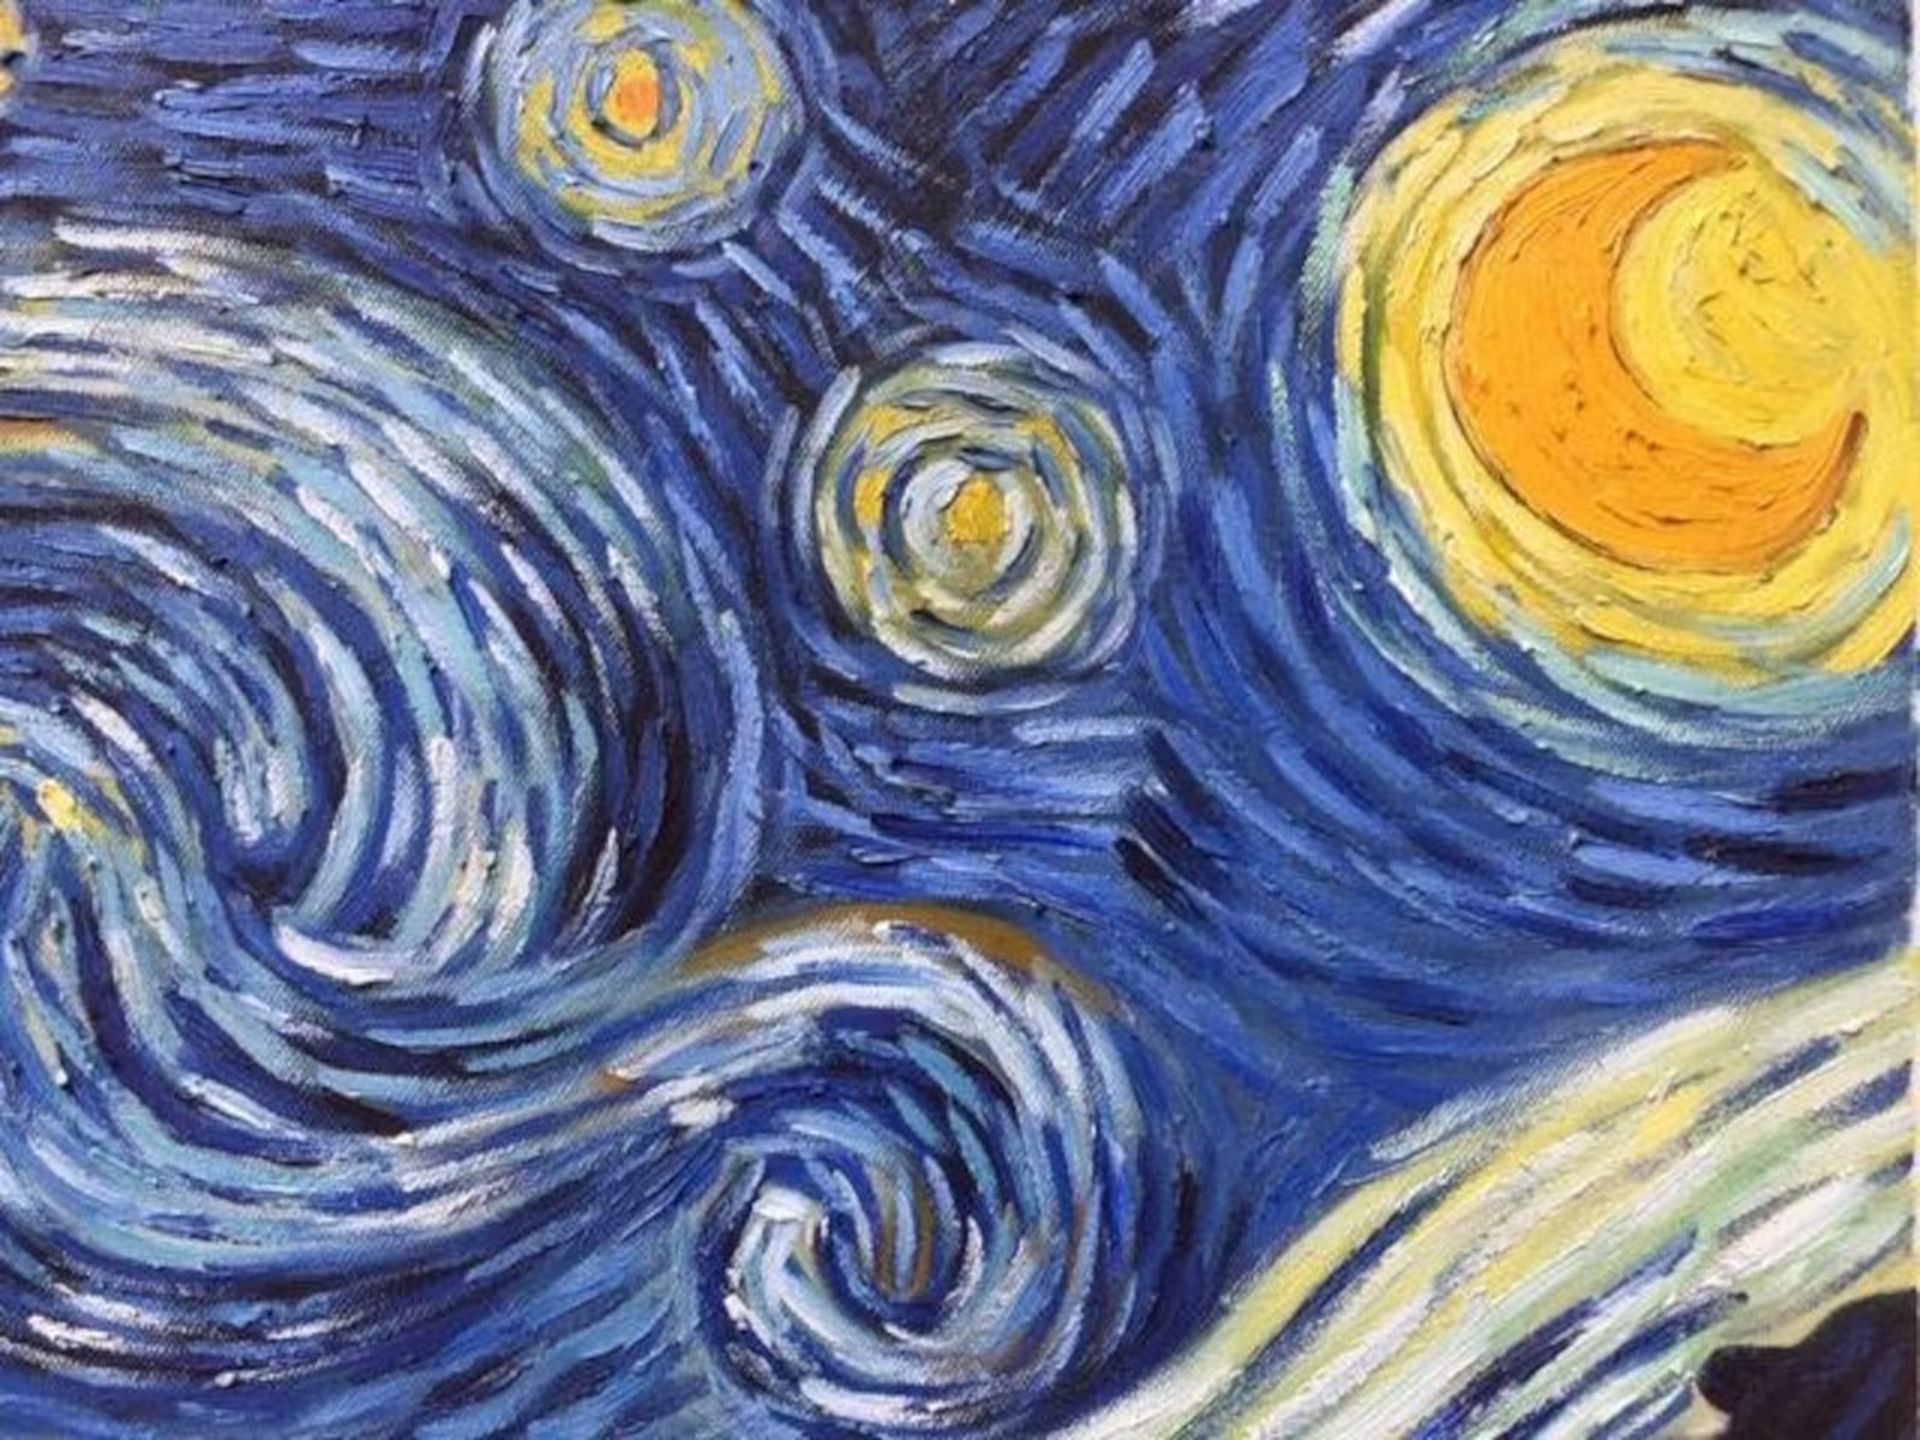 After Vincent Van Gogh "Starry Night" Oil Painting - Image 3 of 4